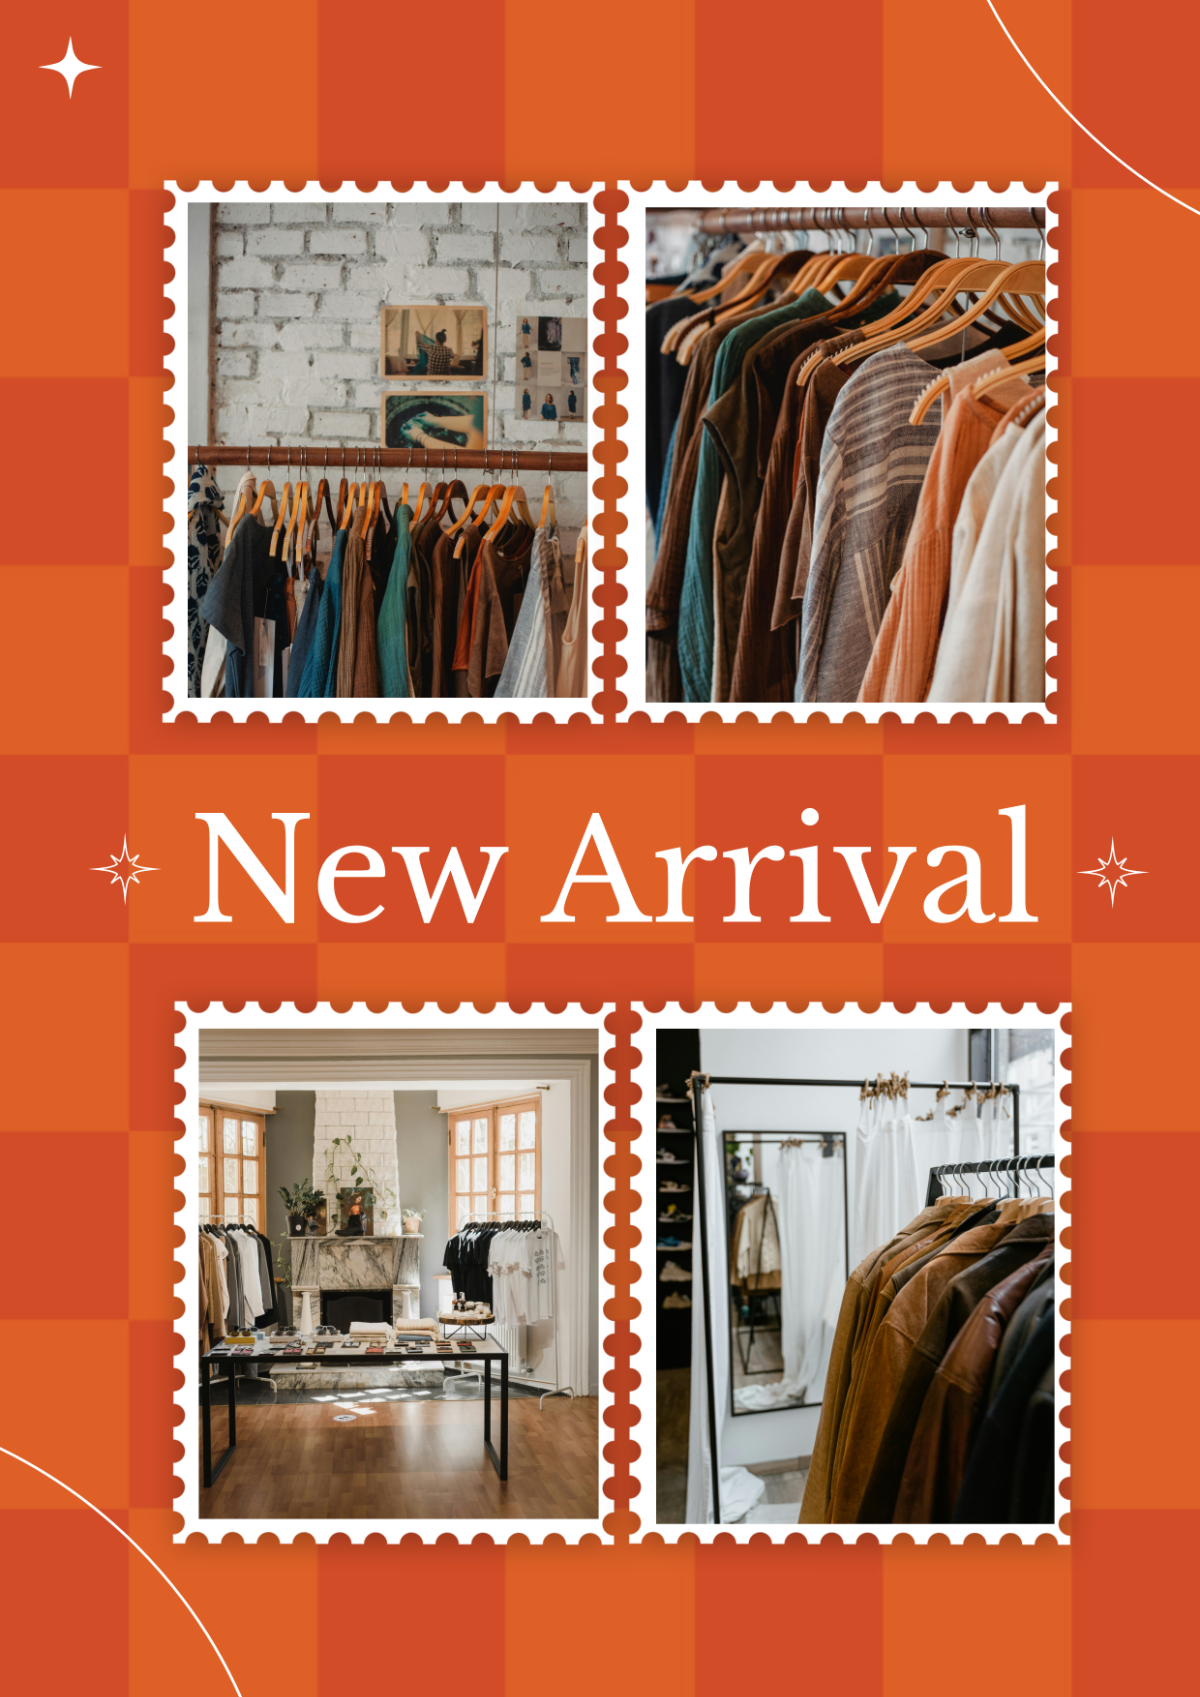 New Arrivals Photo Collage Instagram Post